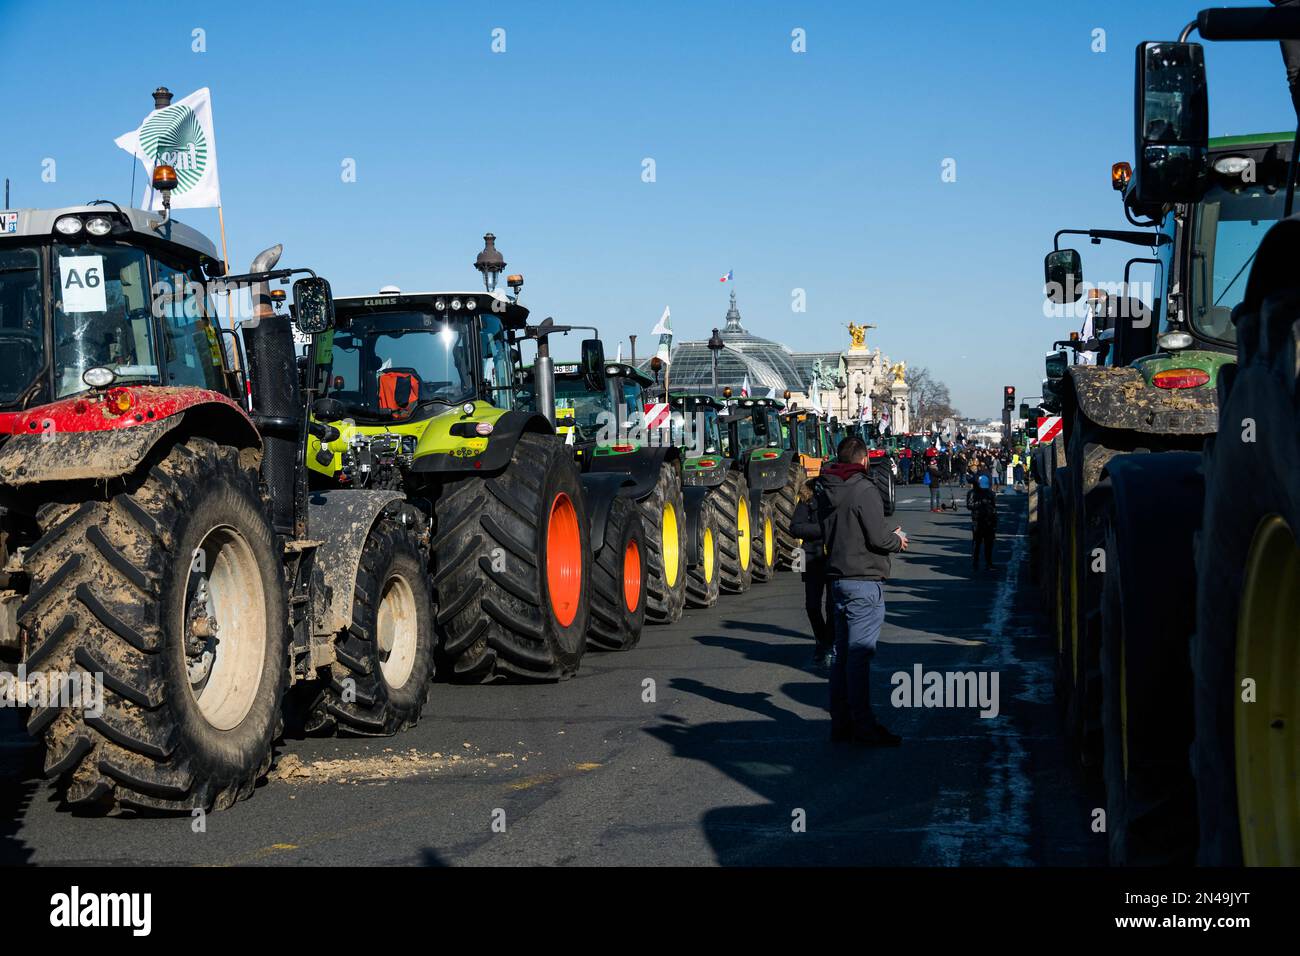 https://c8.alamy.com/comp/2N49JYT/paris-france-08022023-several-thousand-farmers-from-all-over-france-including-500-on-tractors-led-by-the-main-union-the-fnsea-converged-on-paris-to-denounce-the-constraints-on-their-profession-in-particular-the-restrictions-on-the-use-of-pesticides-especially-in-sugar-beet-cultivation-bee-killing-insecticides-paris-france-on-february-08-2023-photo-by-pierrick-villetteabacapresscom-2N49JYT.jpg